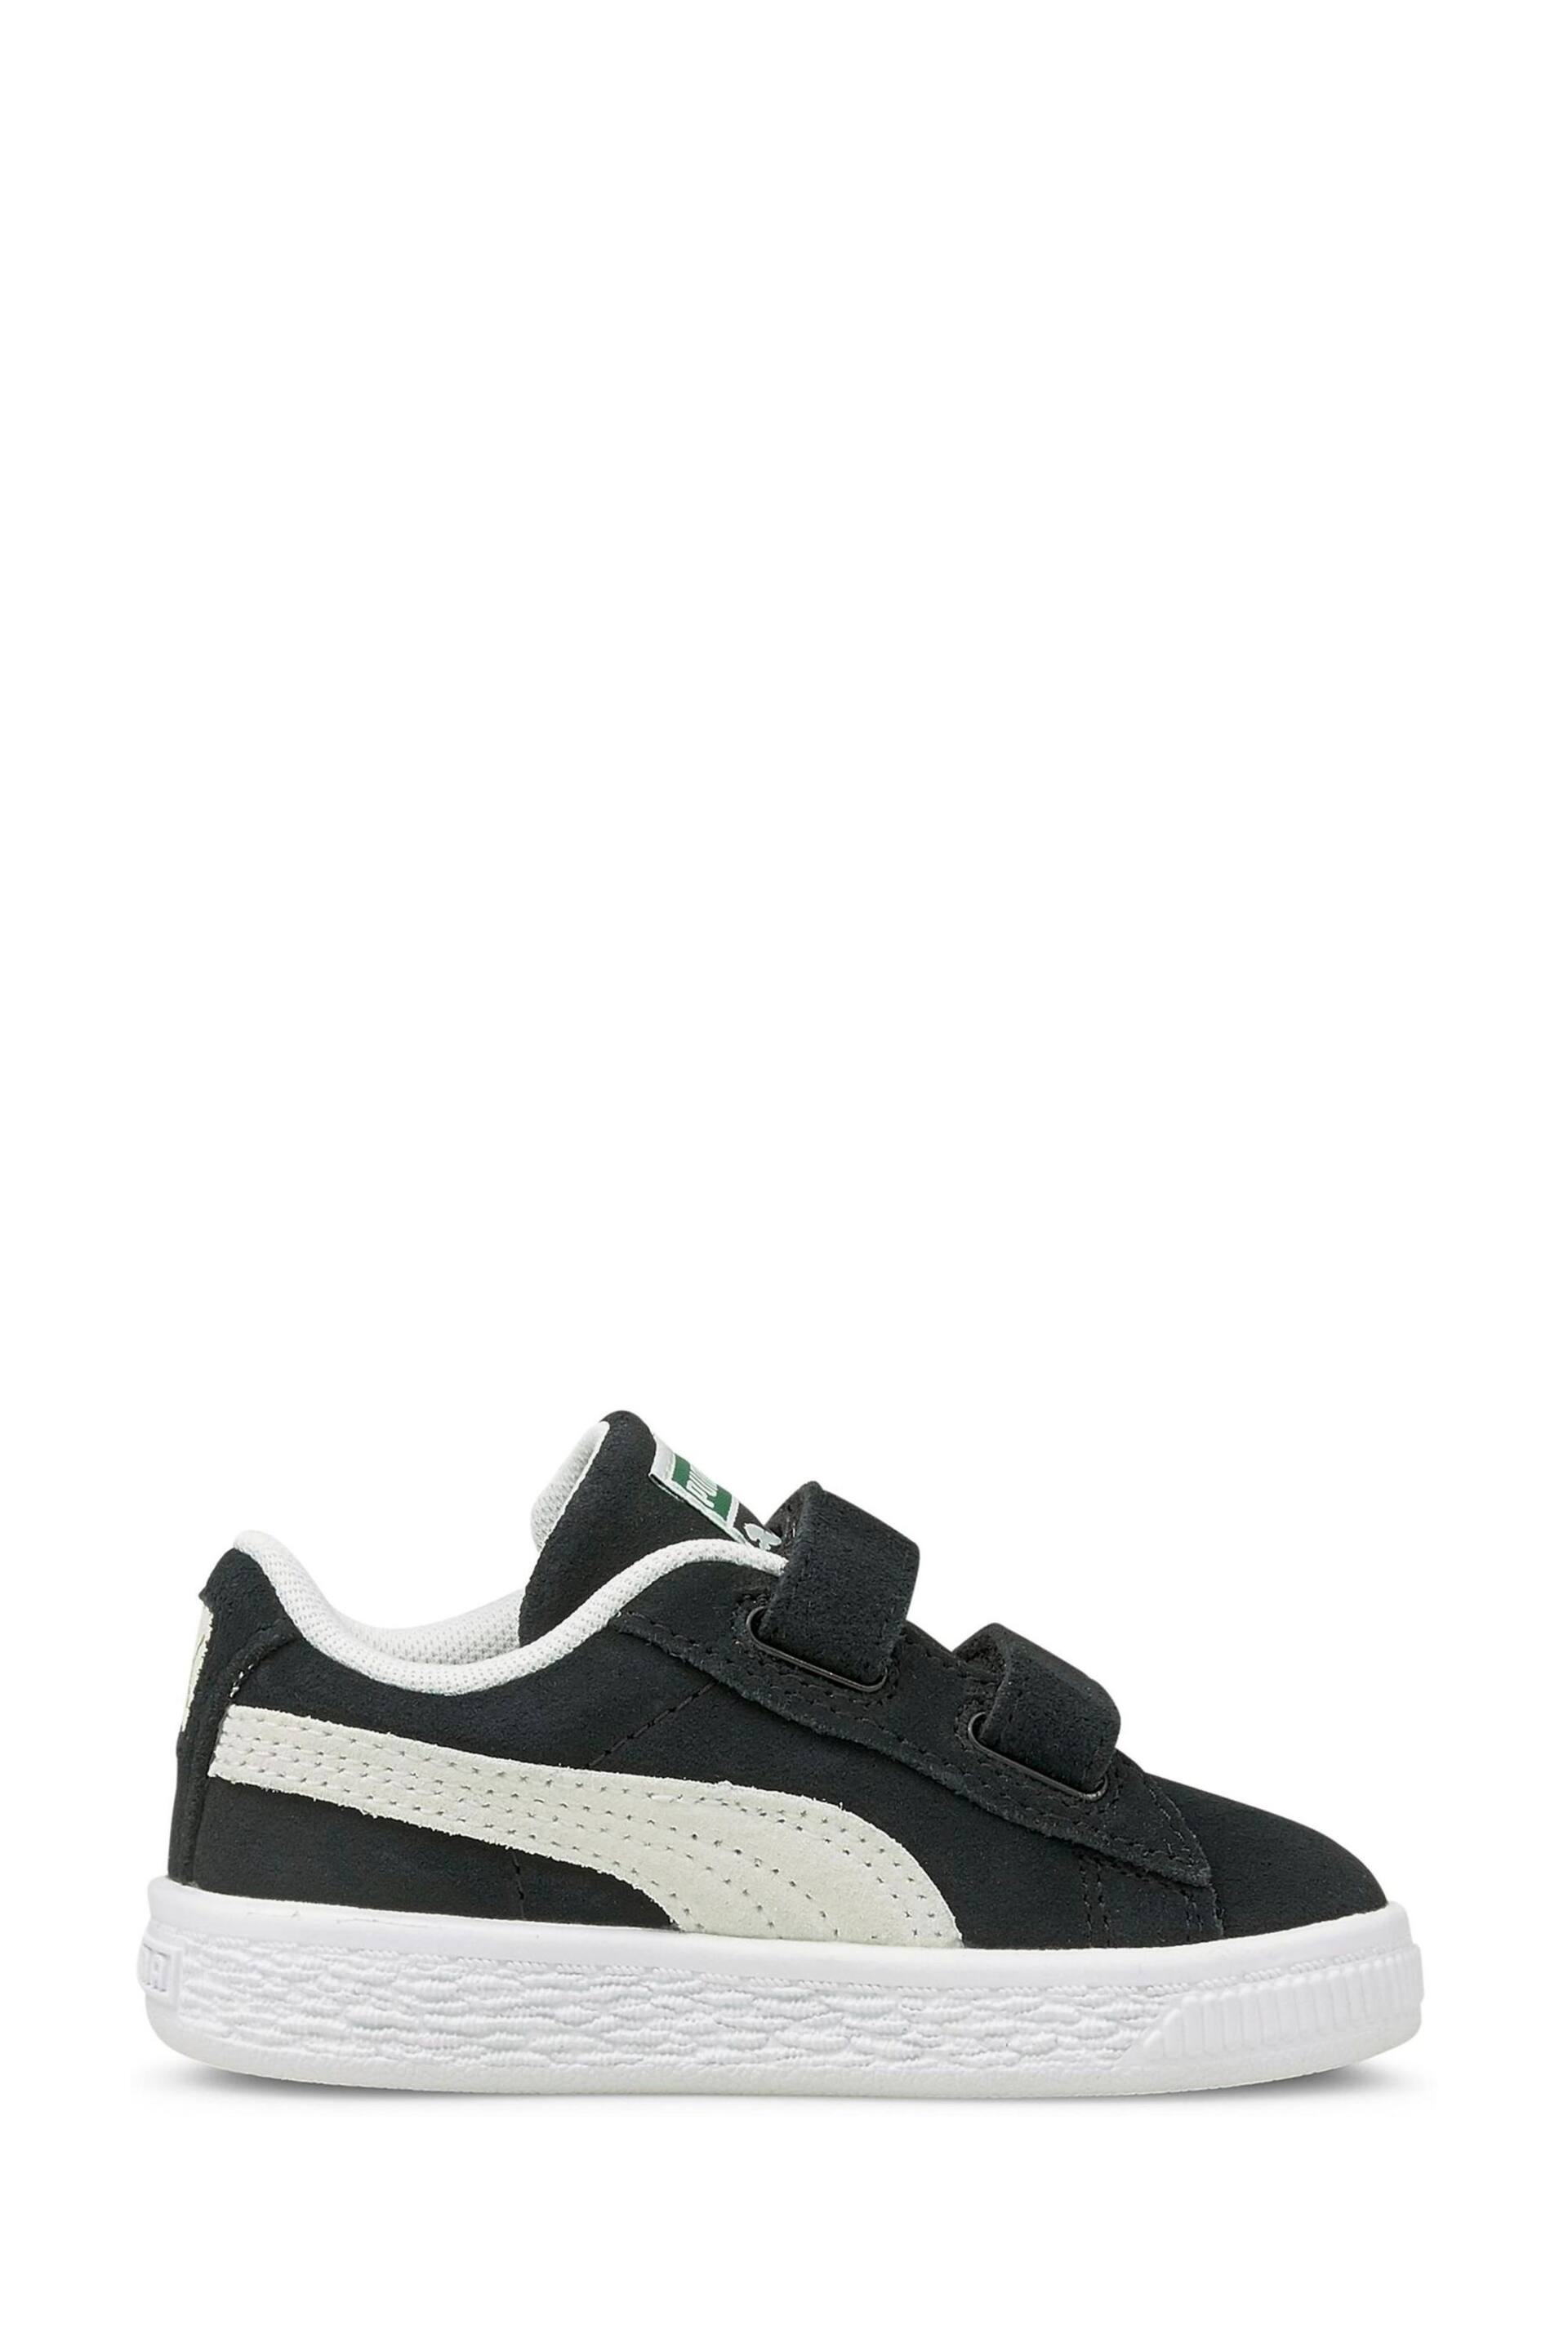 Puma Black Babies Suede Classic XXI Trainers - Image 1 of 11